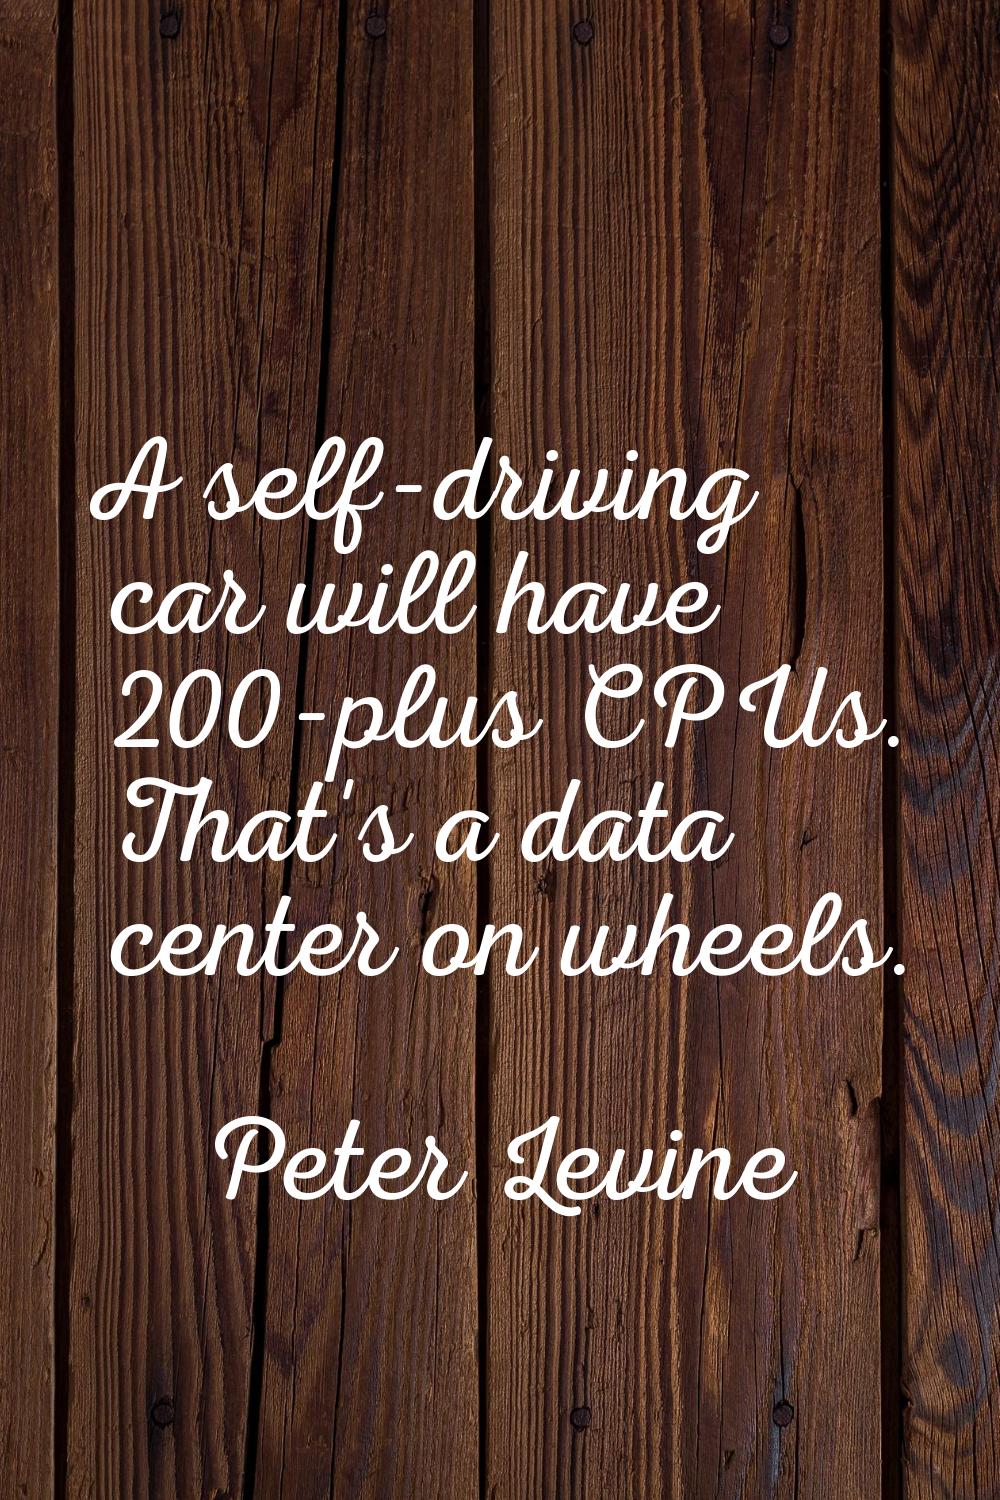 A self-driving car will have 200-plus CPUs. That's a data center on wheels.